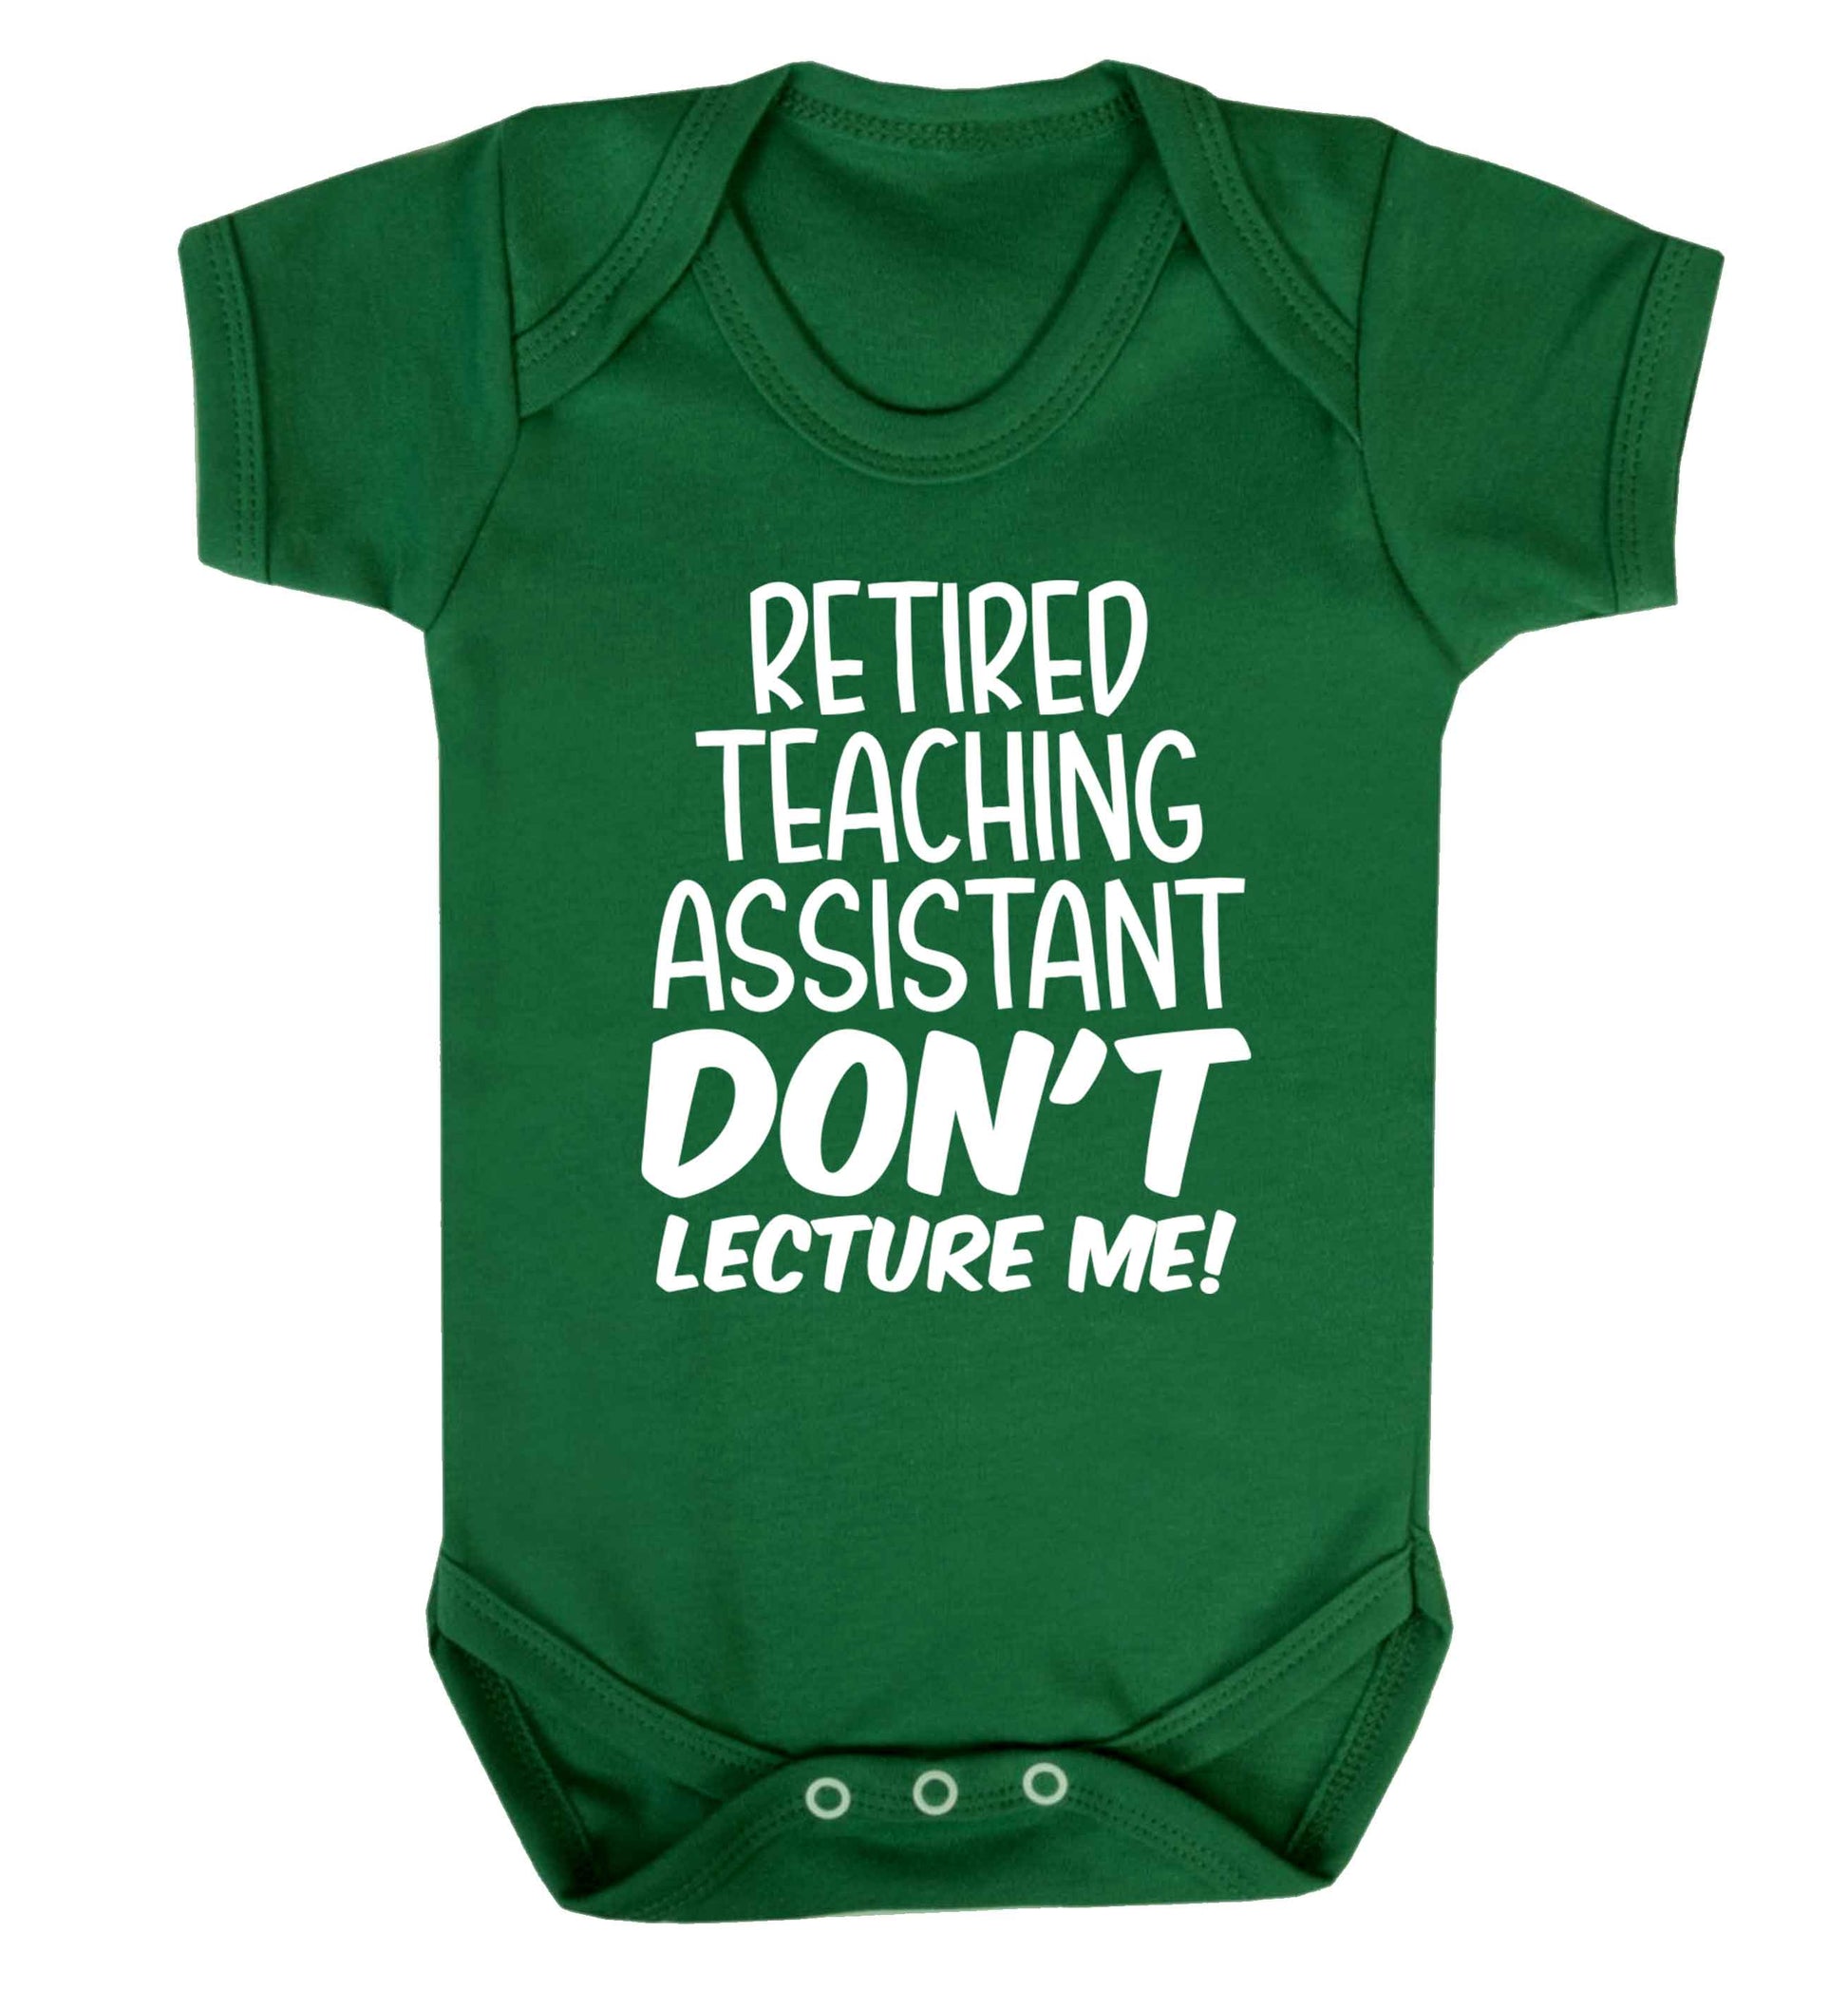 Retired teaching assistant don't lecture me Baby Vest green 18-24 months